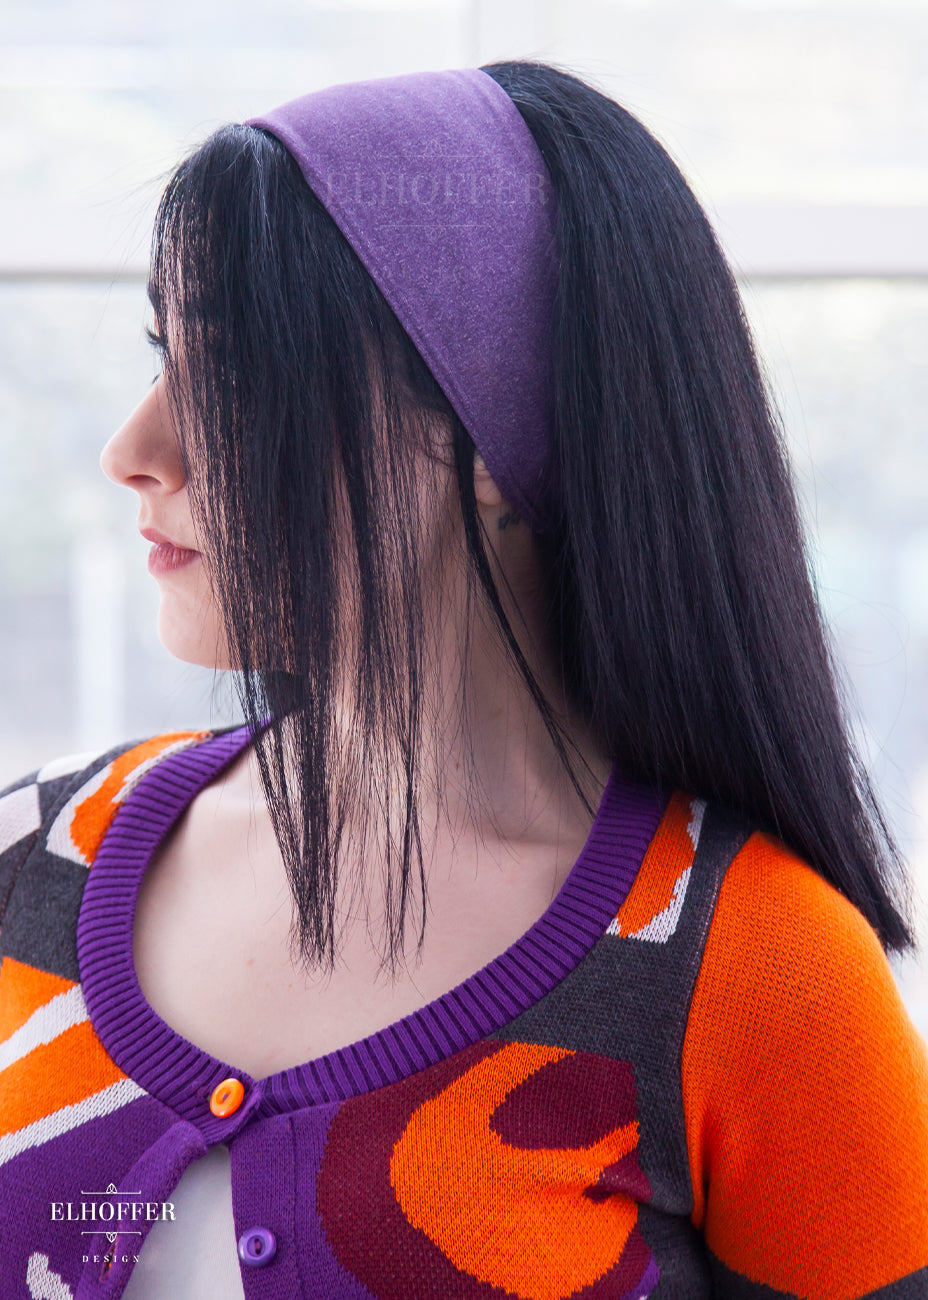 A side view of a heathered purple headband with hemmed edges. The headband is around 3" at the top and gradually gets smaller as it goes around the head.